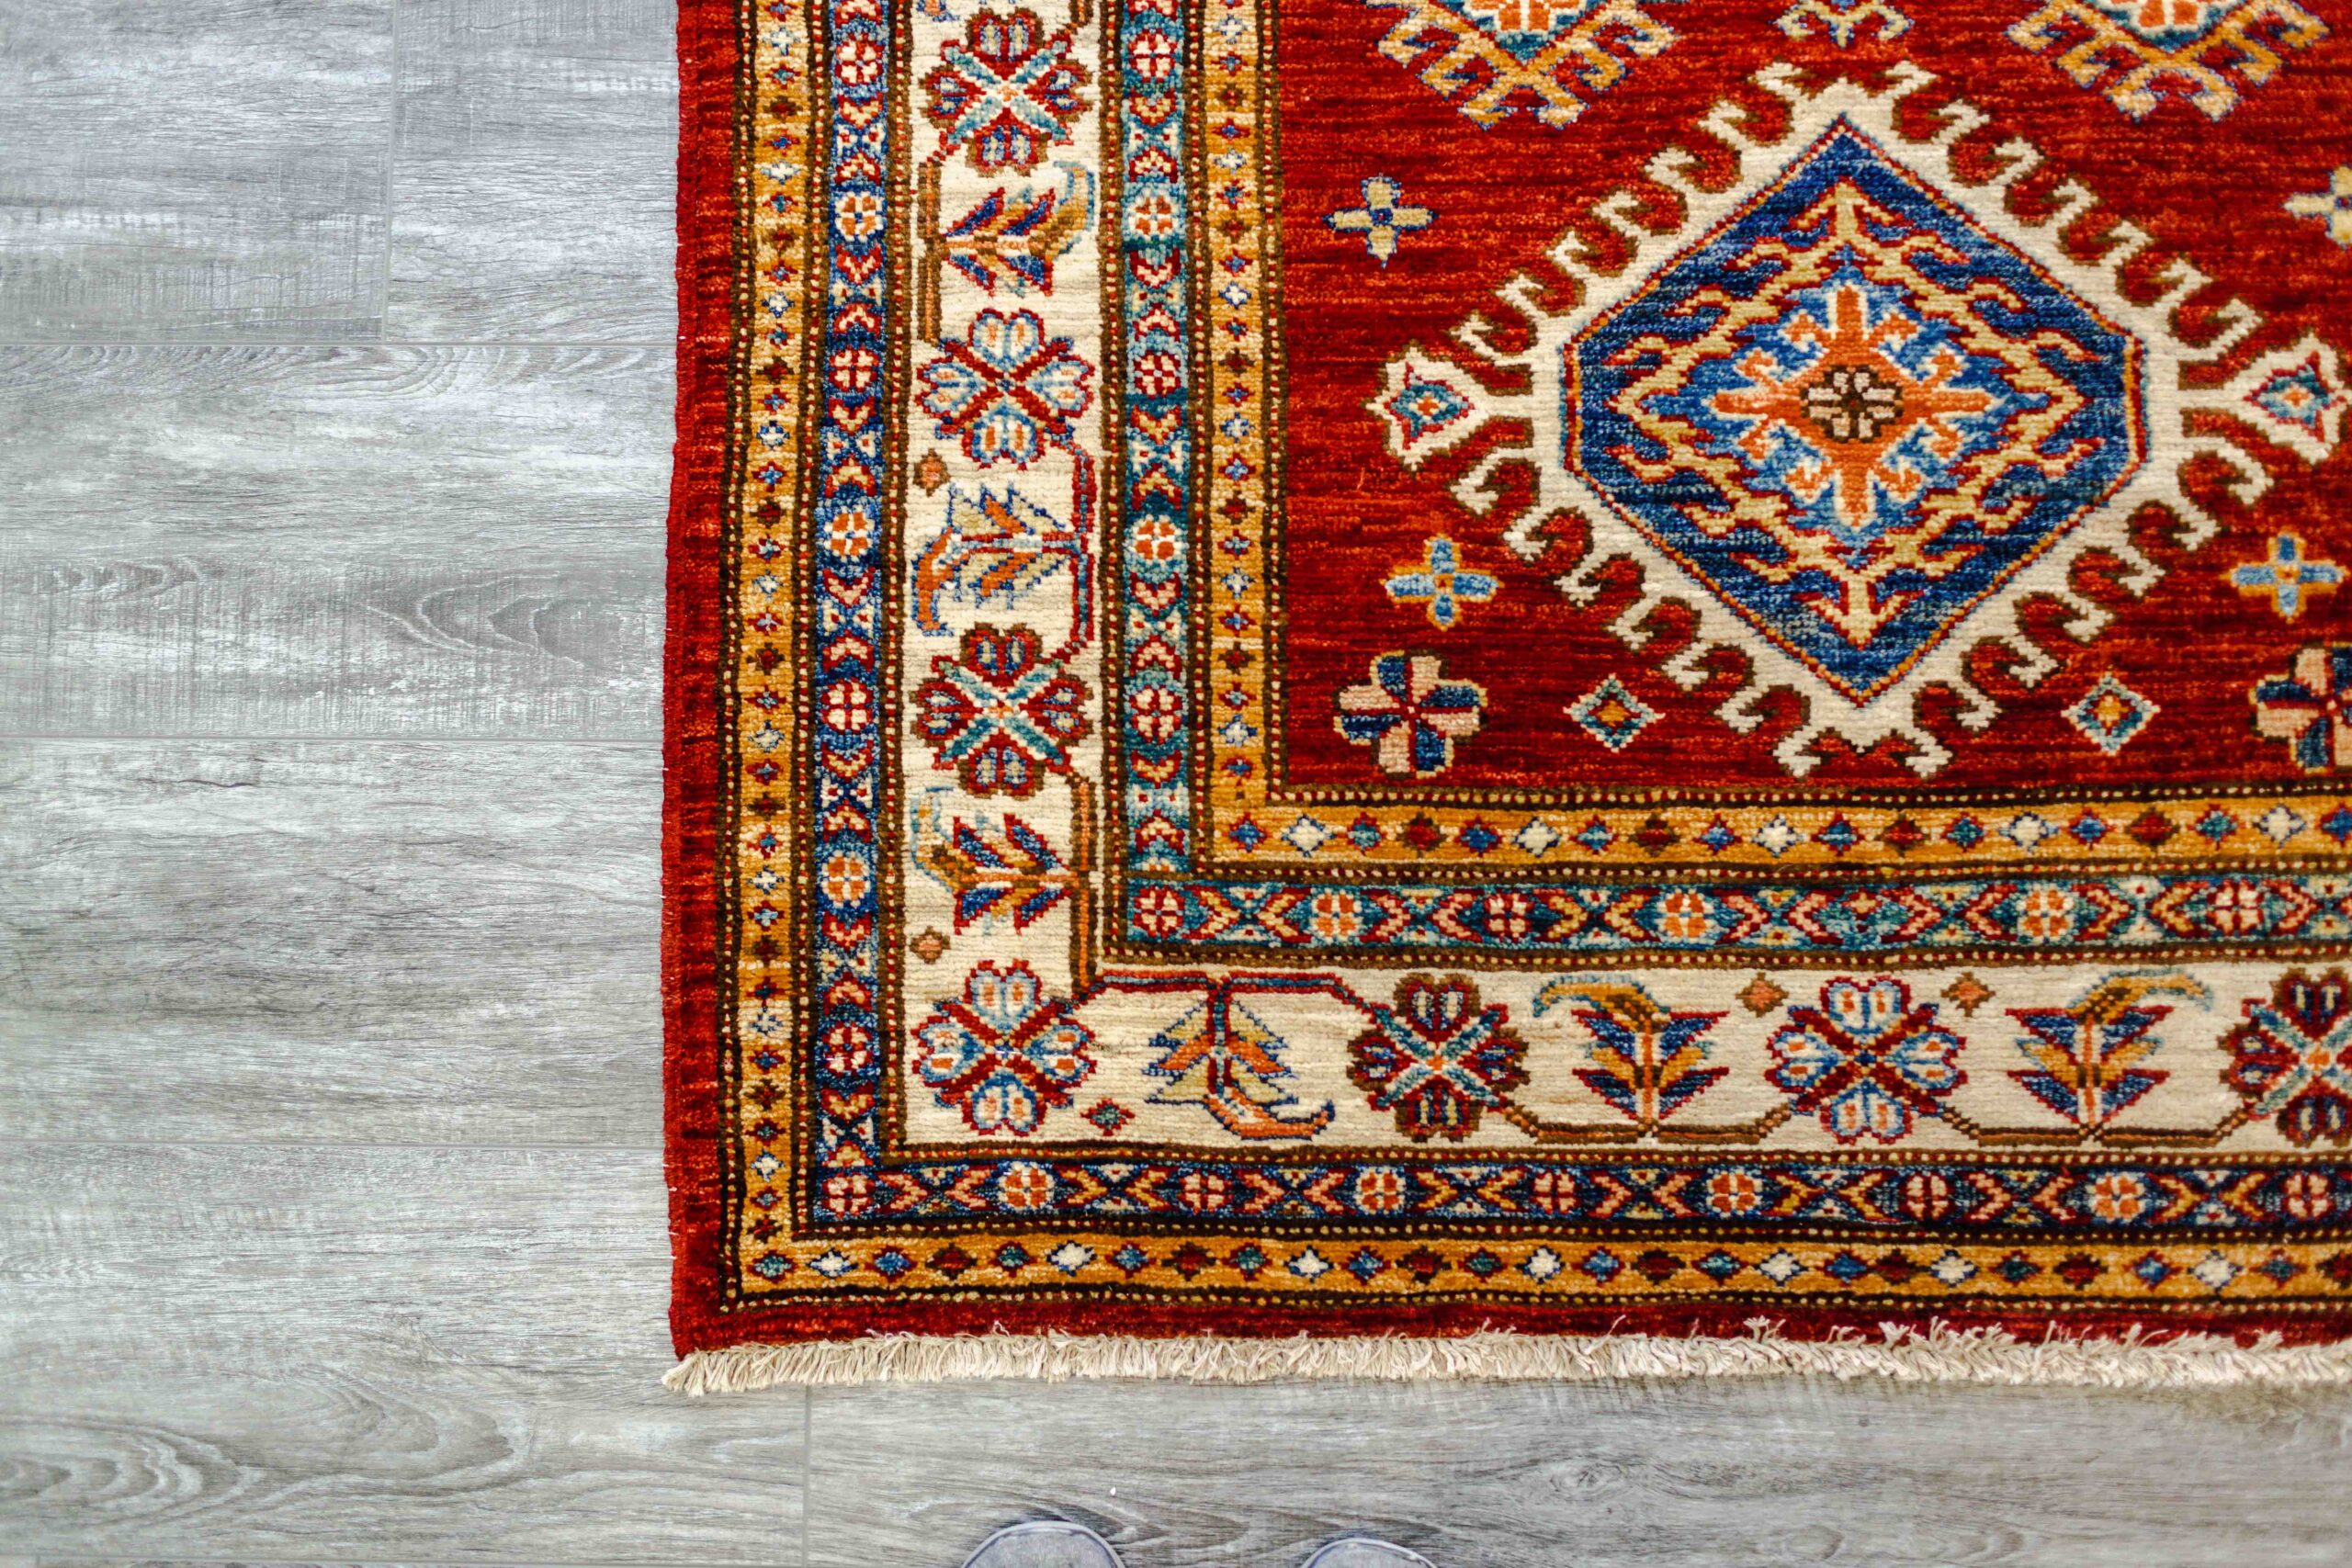 3 Reasons to Incorporate Rugs in Your Home